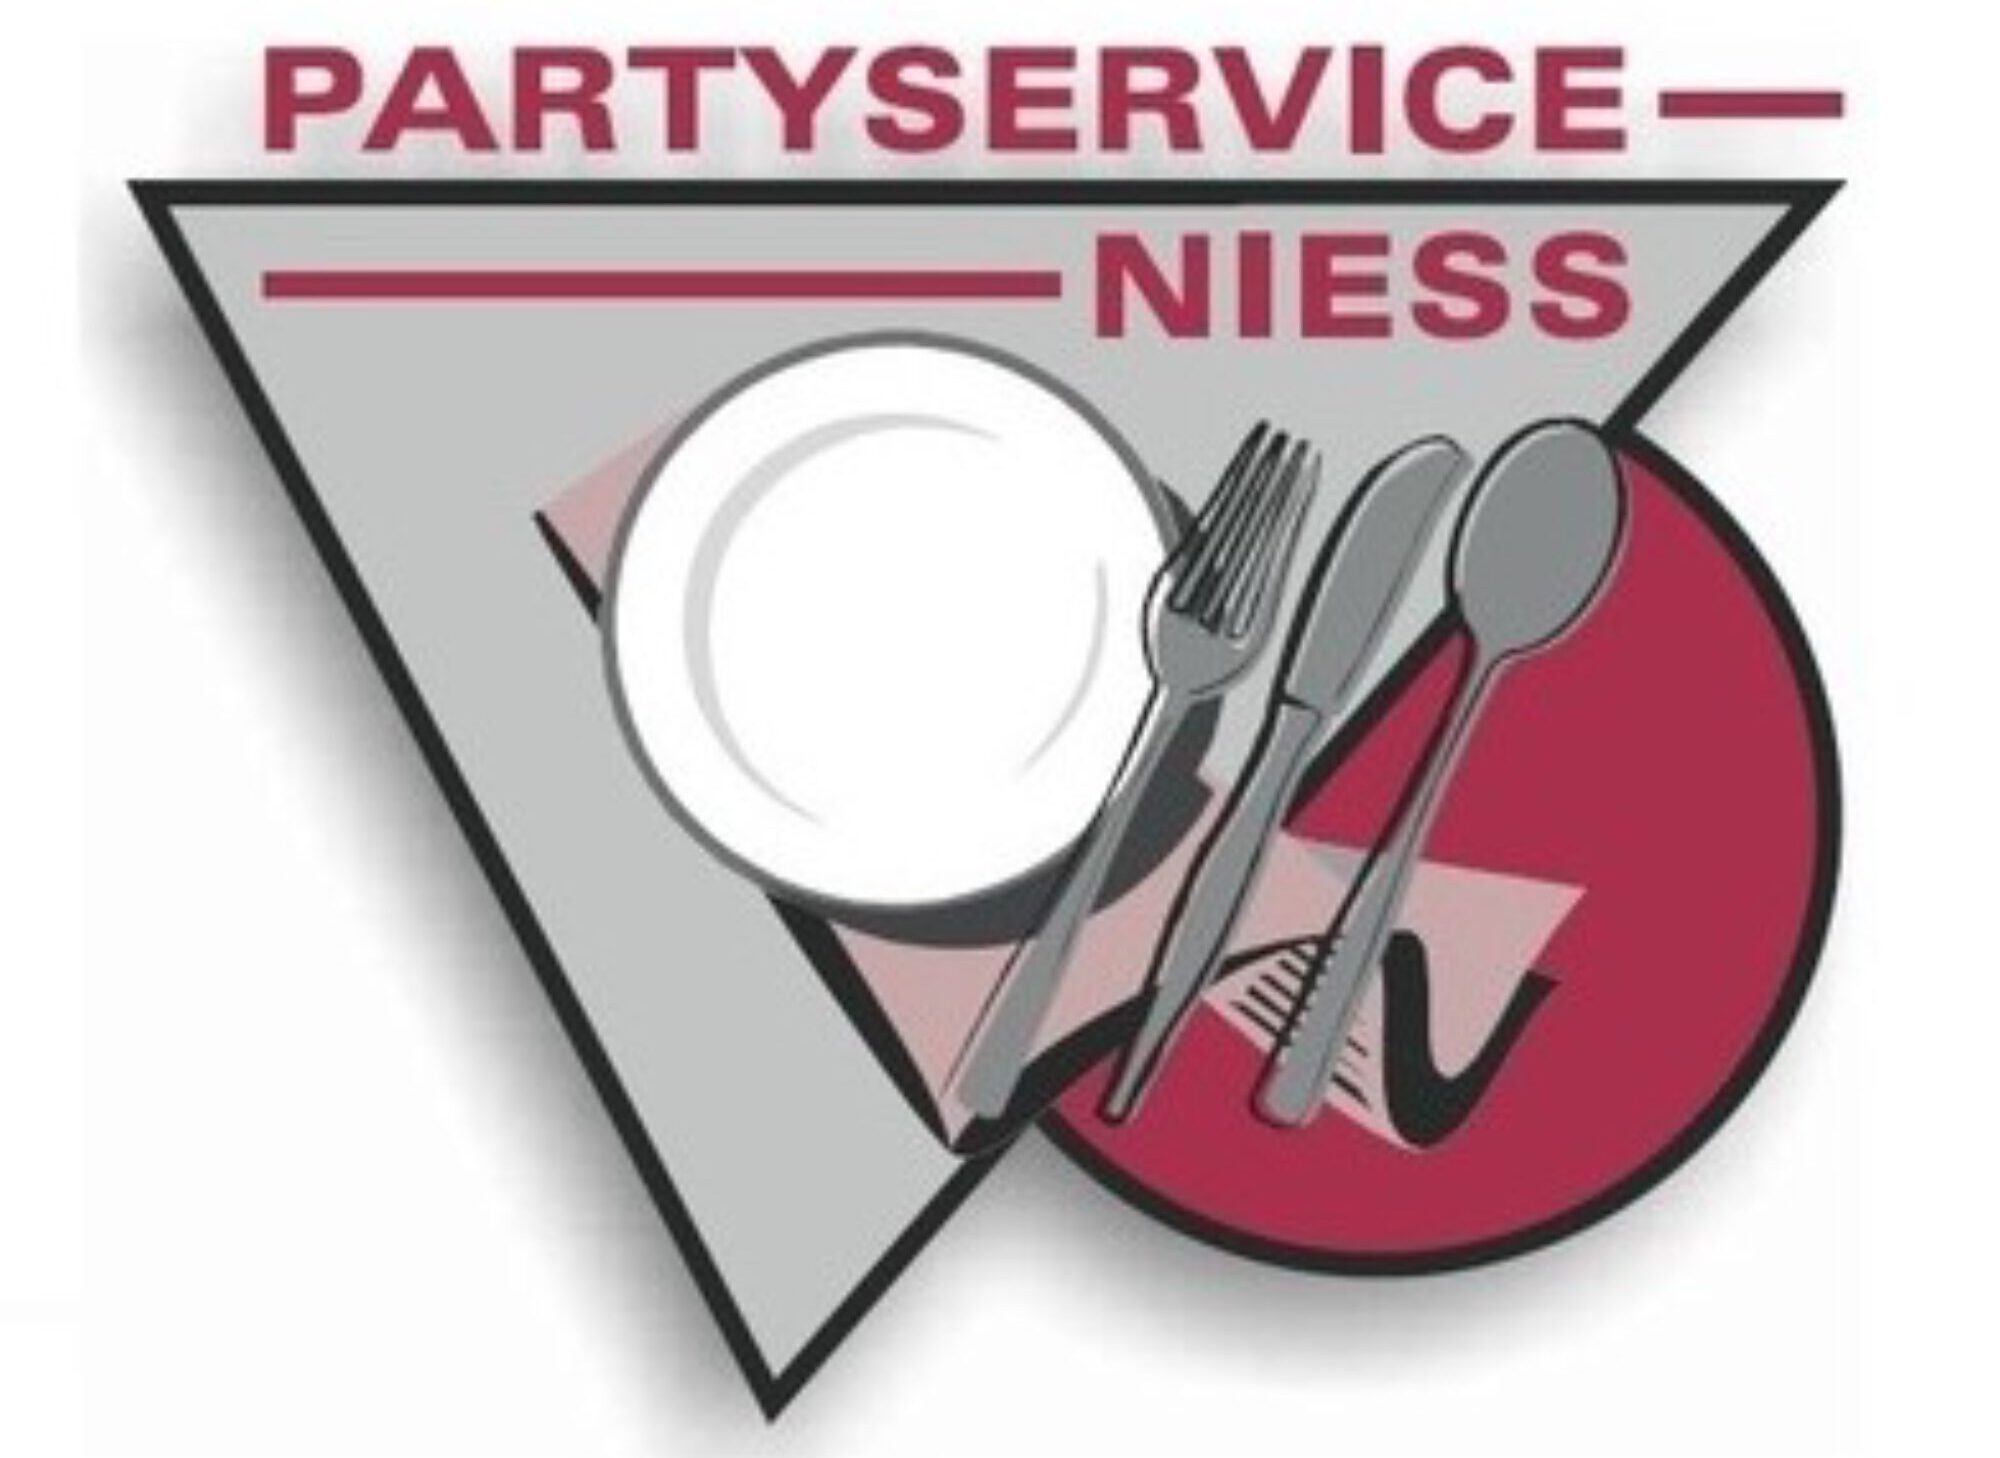 Partyservice Niess